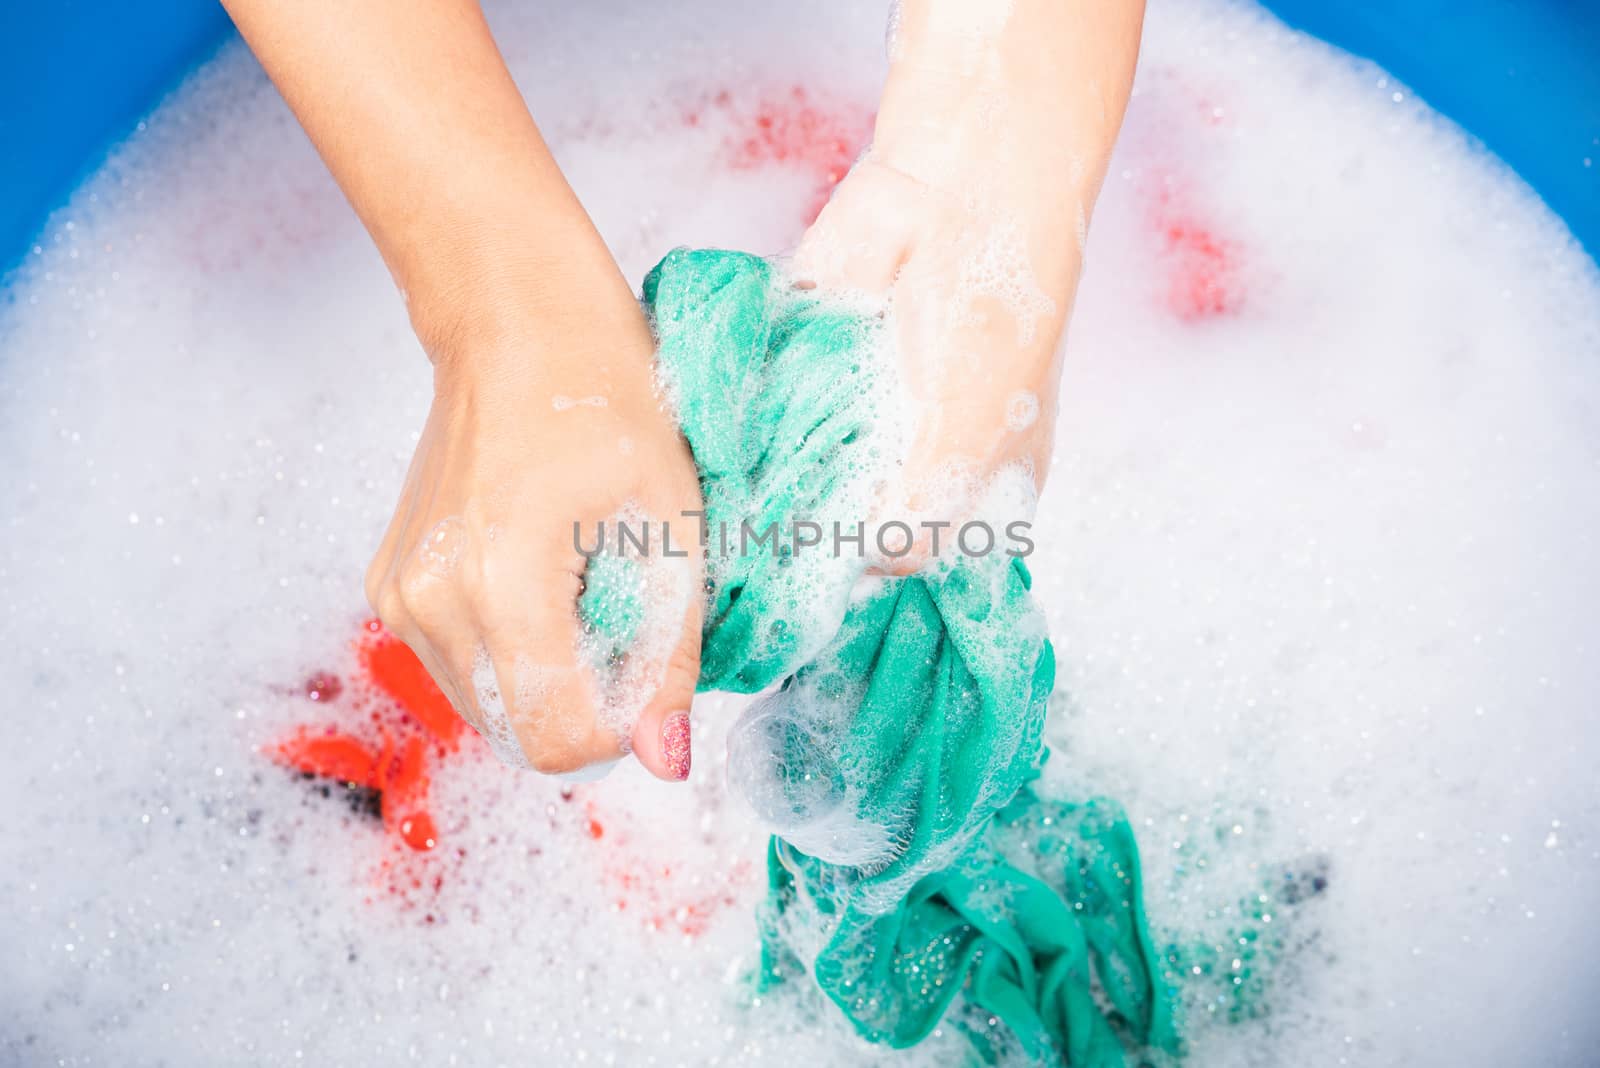 Woman use hands washing color clothes in basin by Sorapop